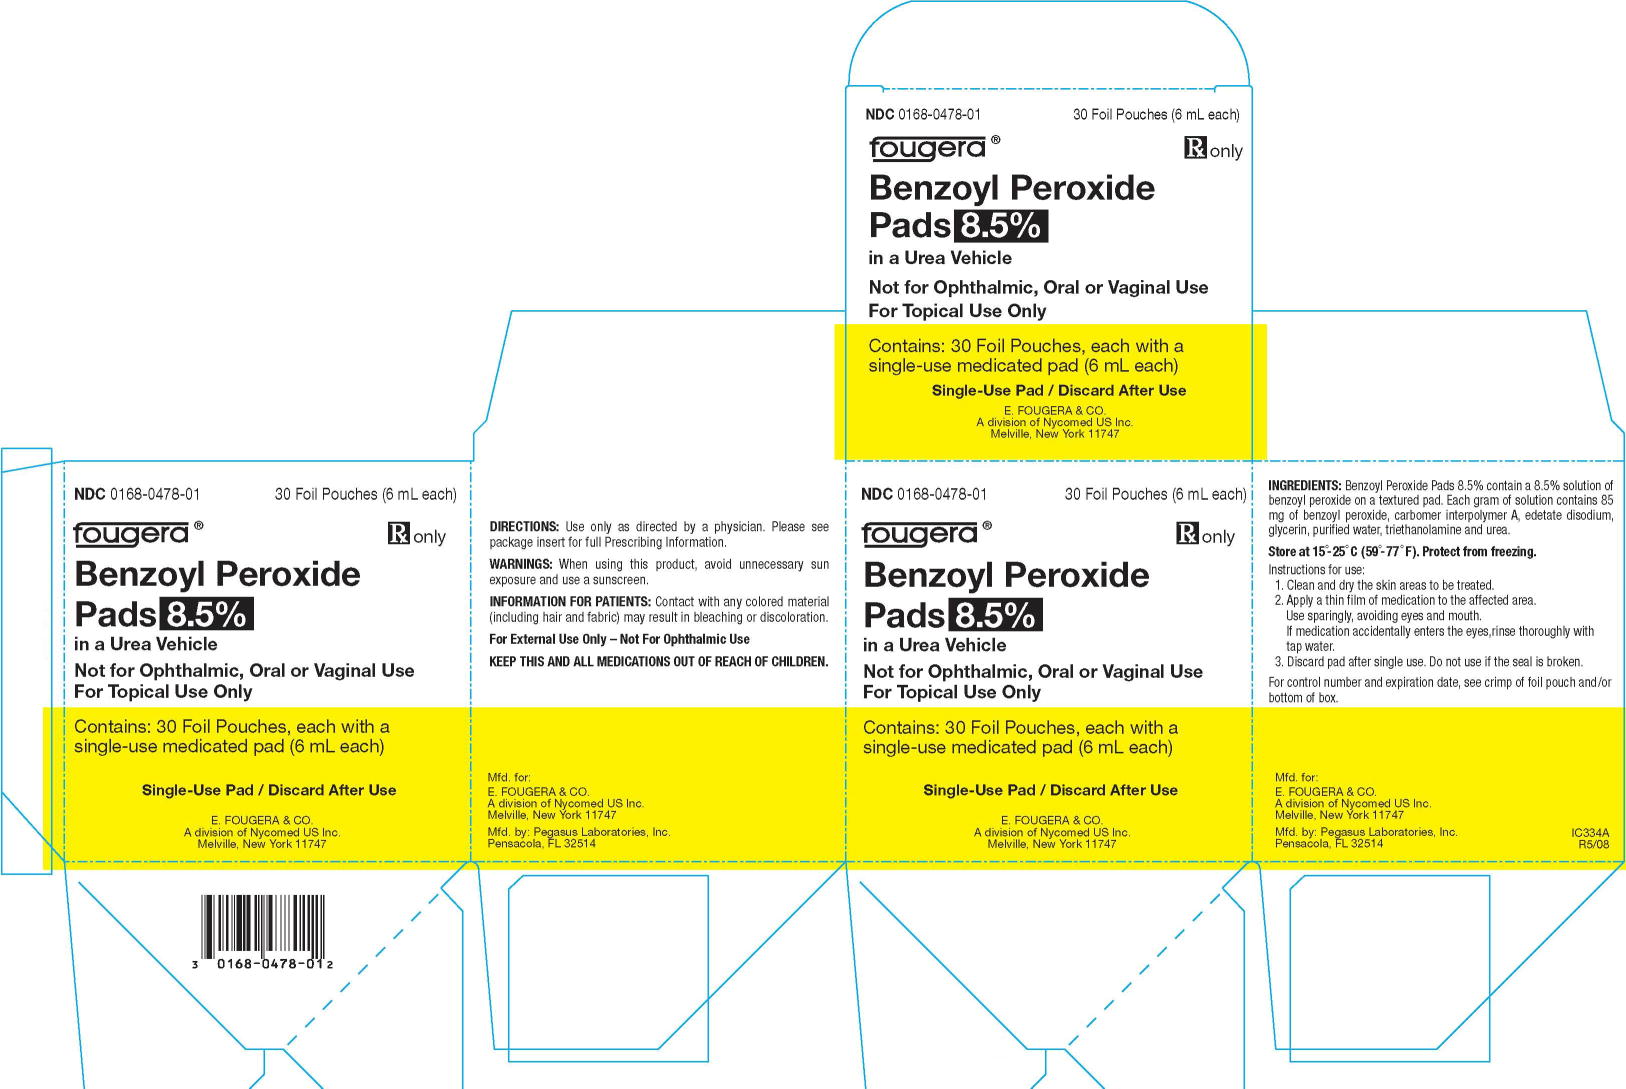  BENZOYL PEROXIDE PADS 8.5% - CARTON OF 30 FOIL POUCHES (6 mL each)
